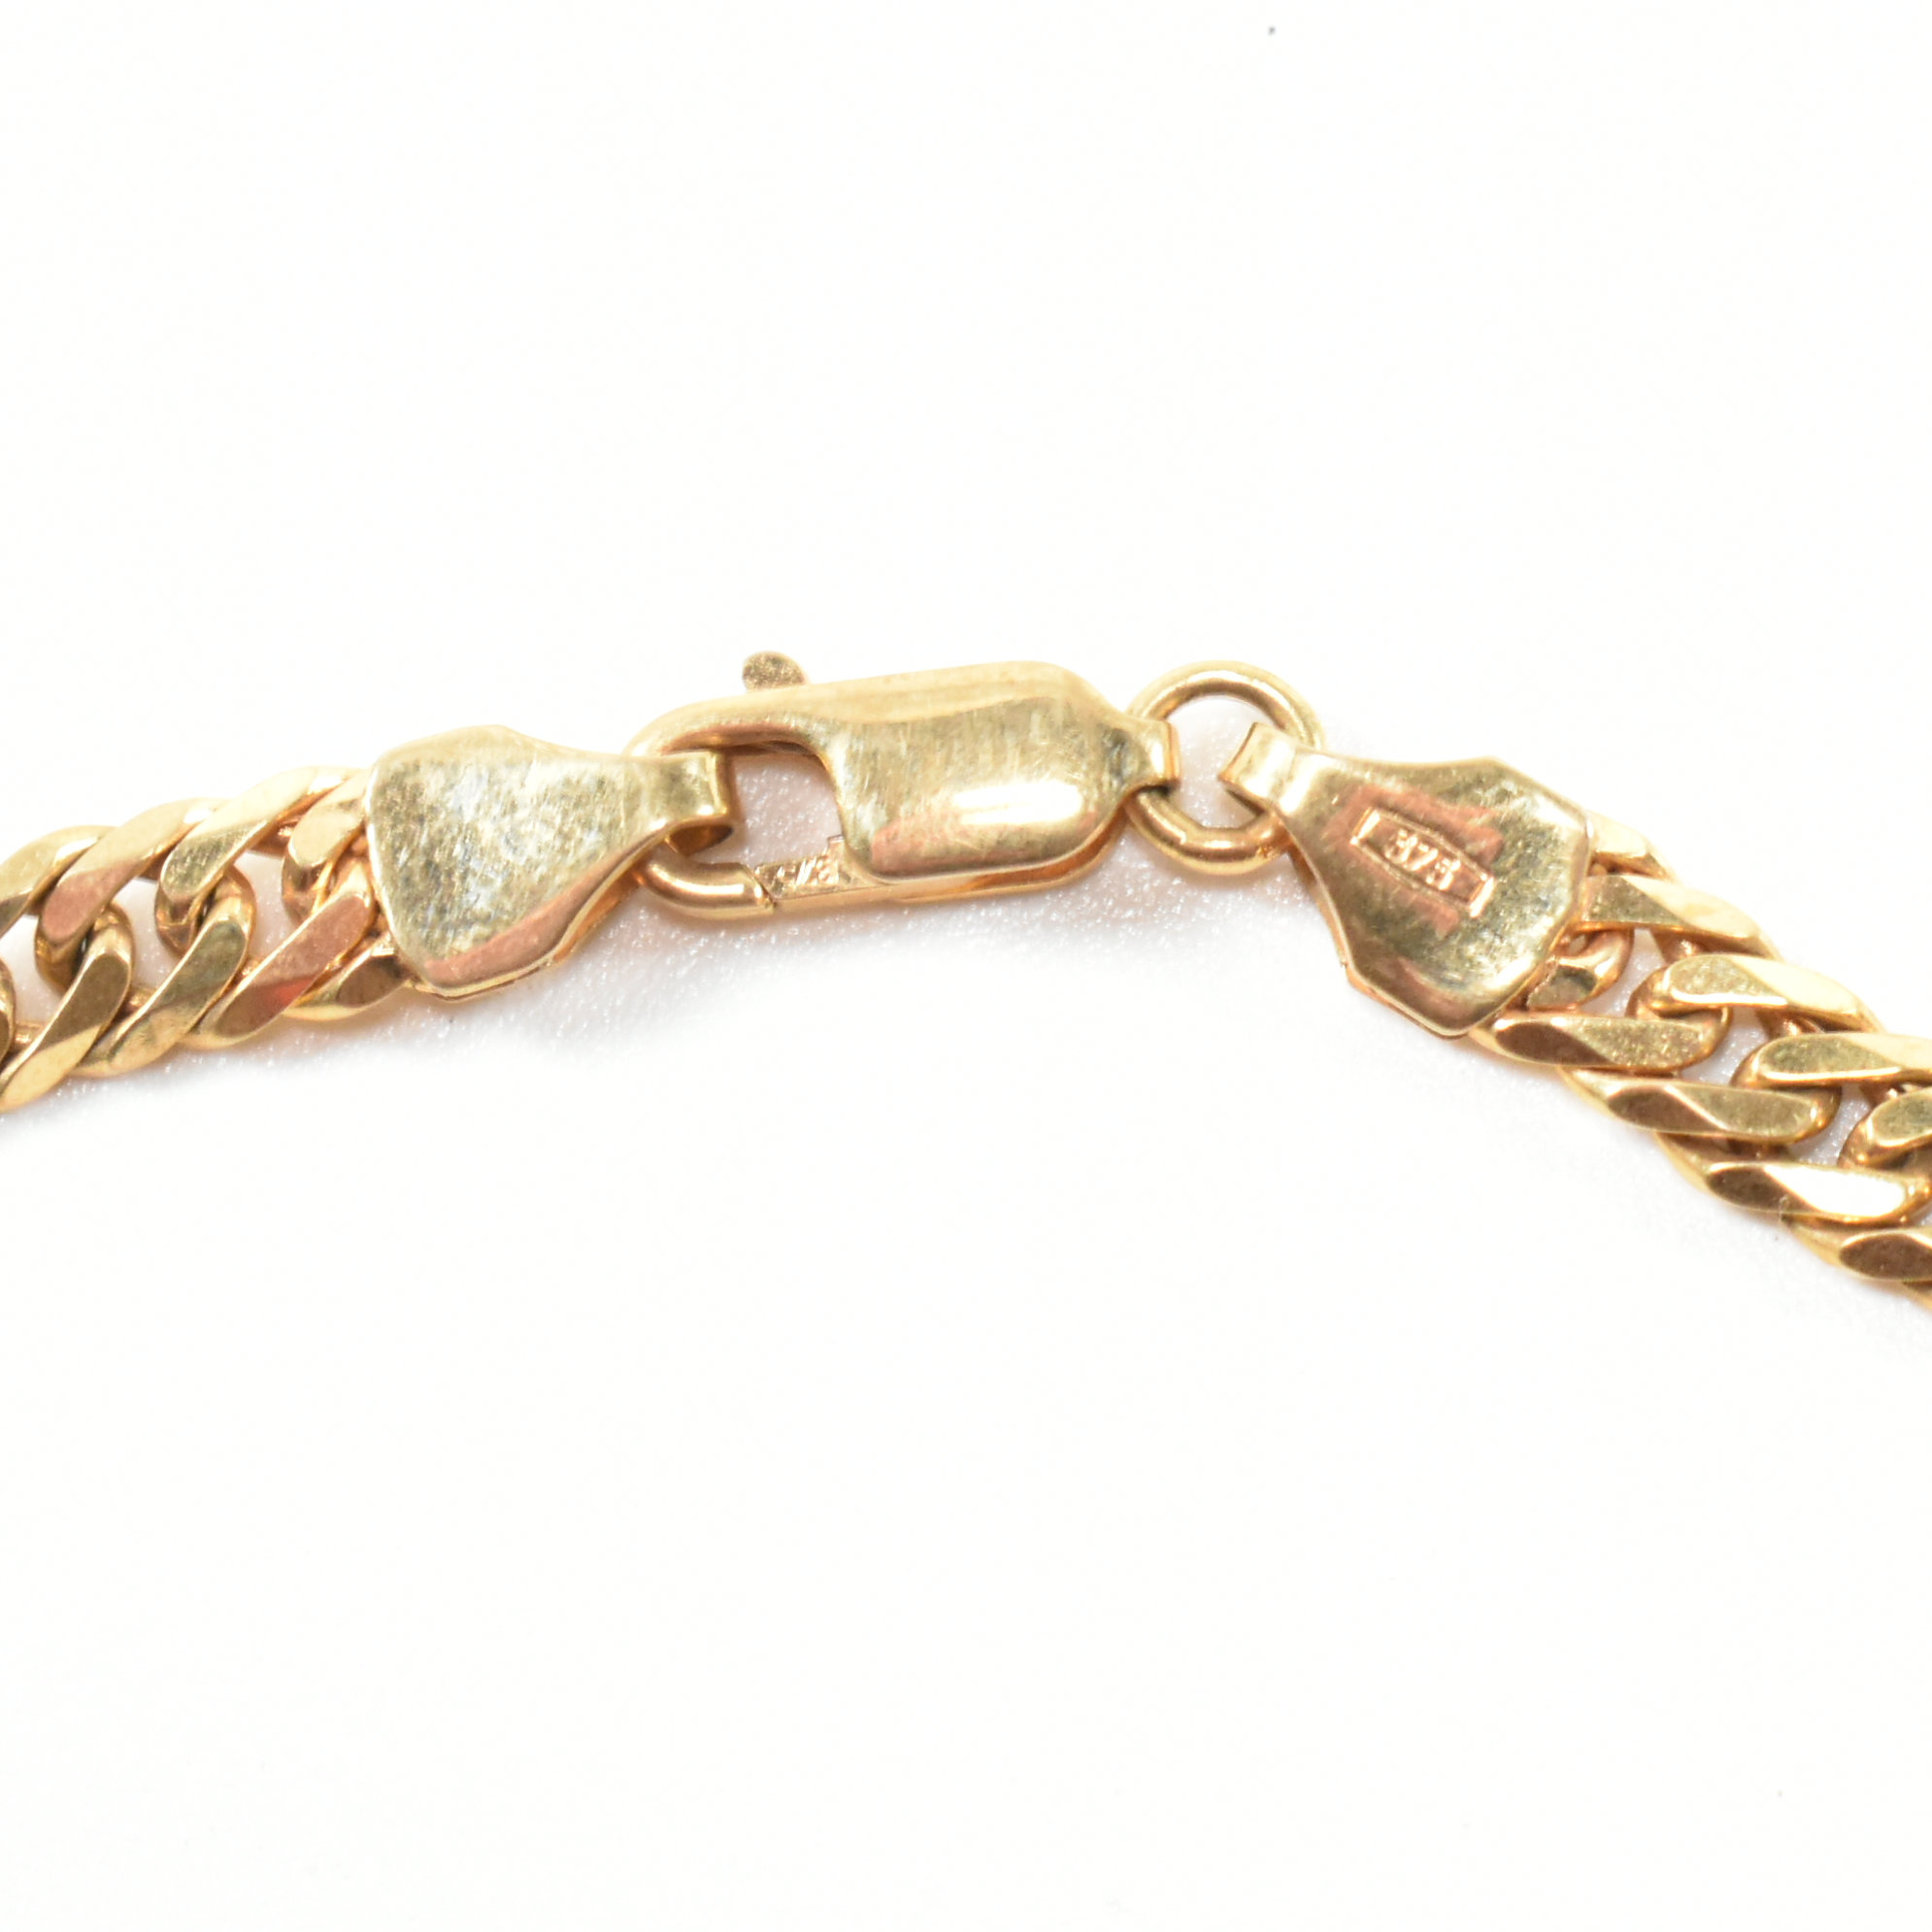 HALLMARKED 9CT GOLD FLAT CURB LINK CHAIN NECKLACE - Image 3 of 5